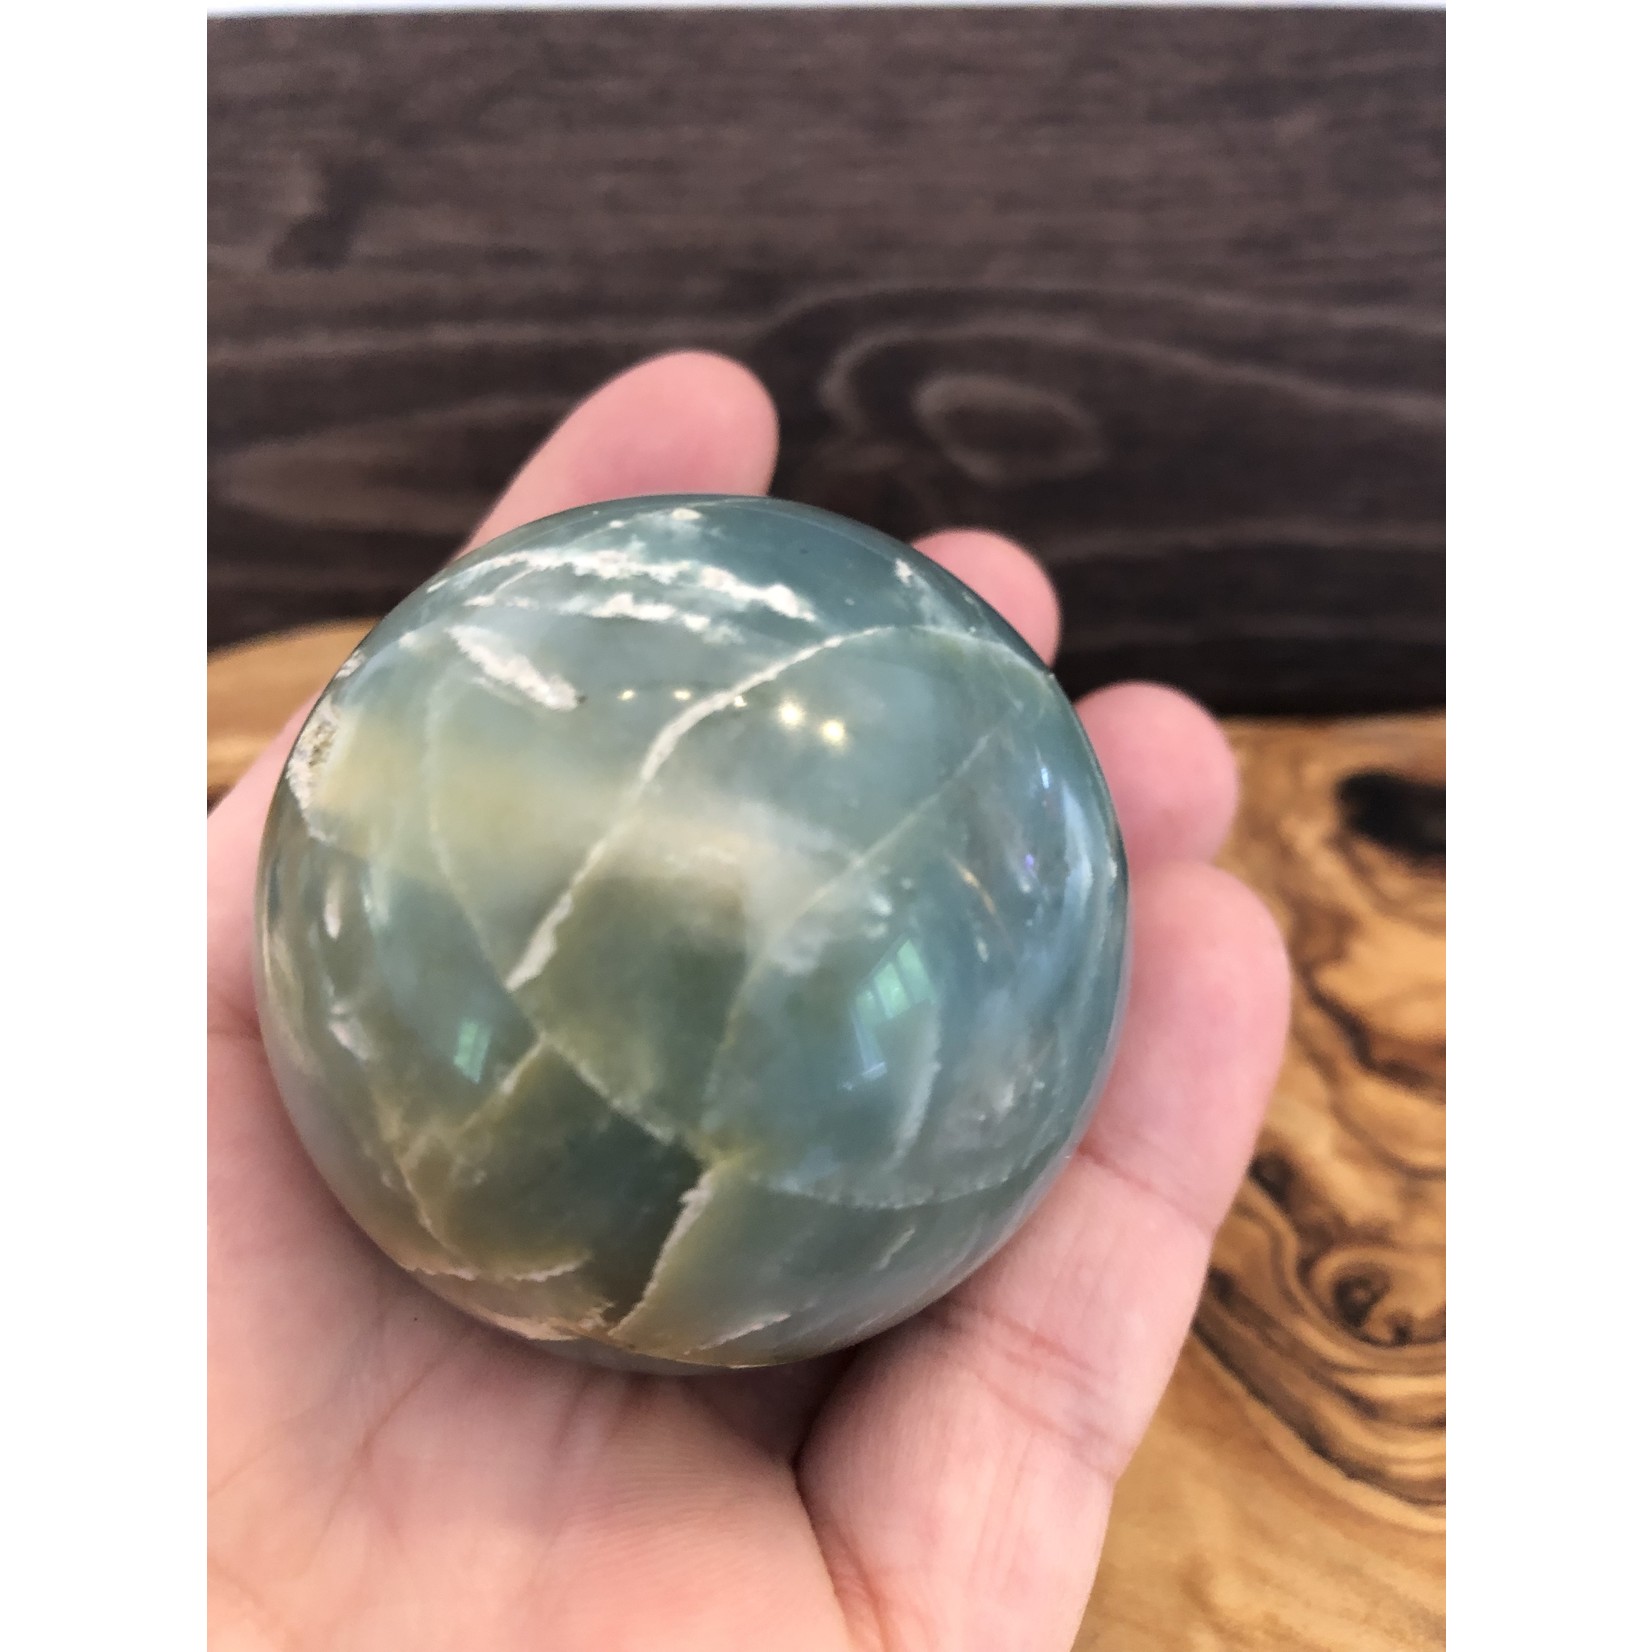 large caribbean calcite sphere, looks like a globe, purifies and aligns the chakras, balances the yin and yang energies